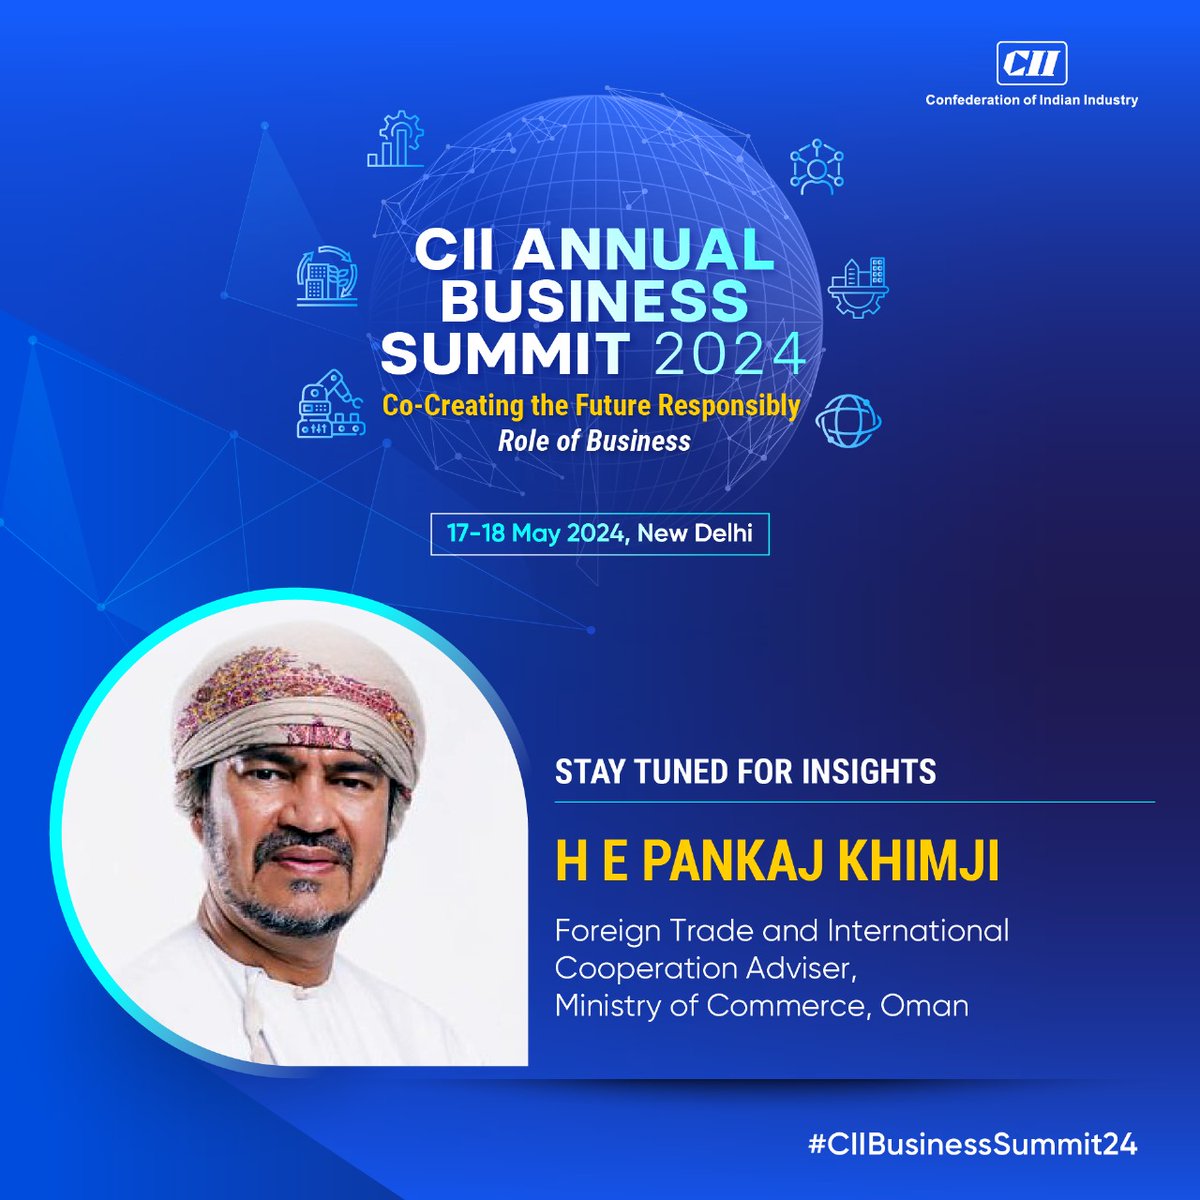 H E Pankaj Khimji, Foreign Trade and International Cooperation Adviser, Ministry of Commerce, Oman shares deep insights at the CII Annual Business Summit 2024! Experts & thought leaders get together to discuss the future of India. #StayTuned ➡17-18 May